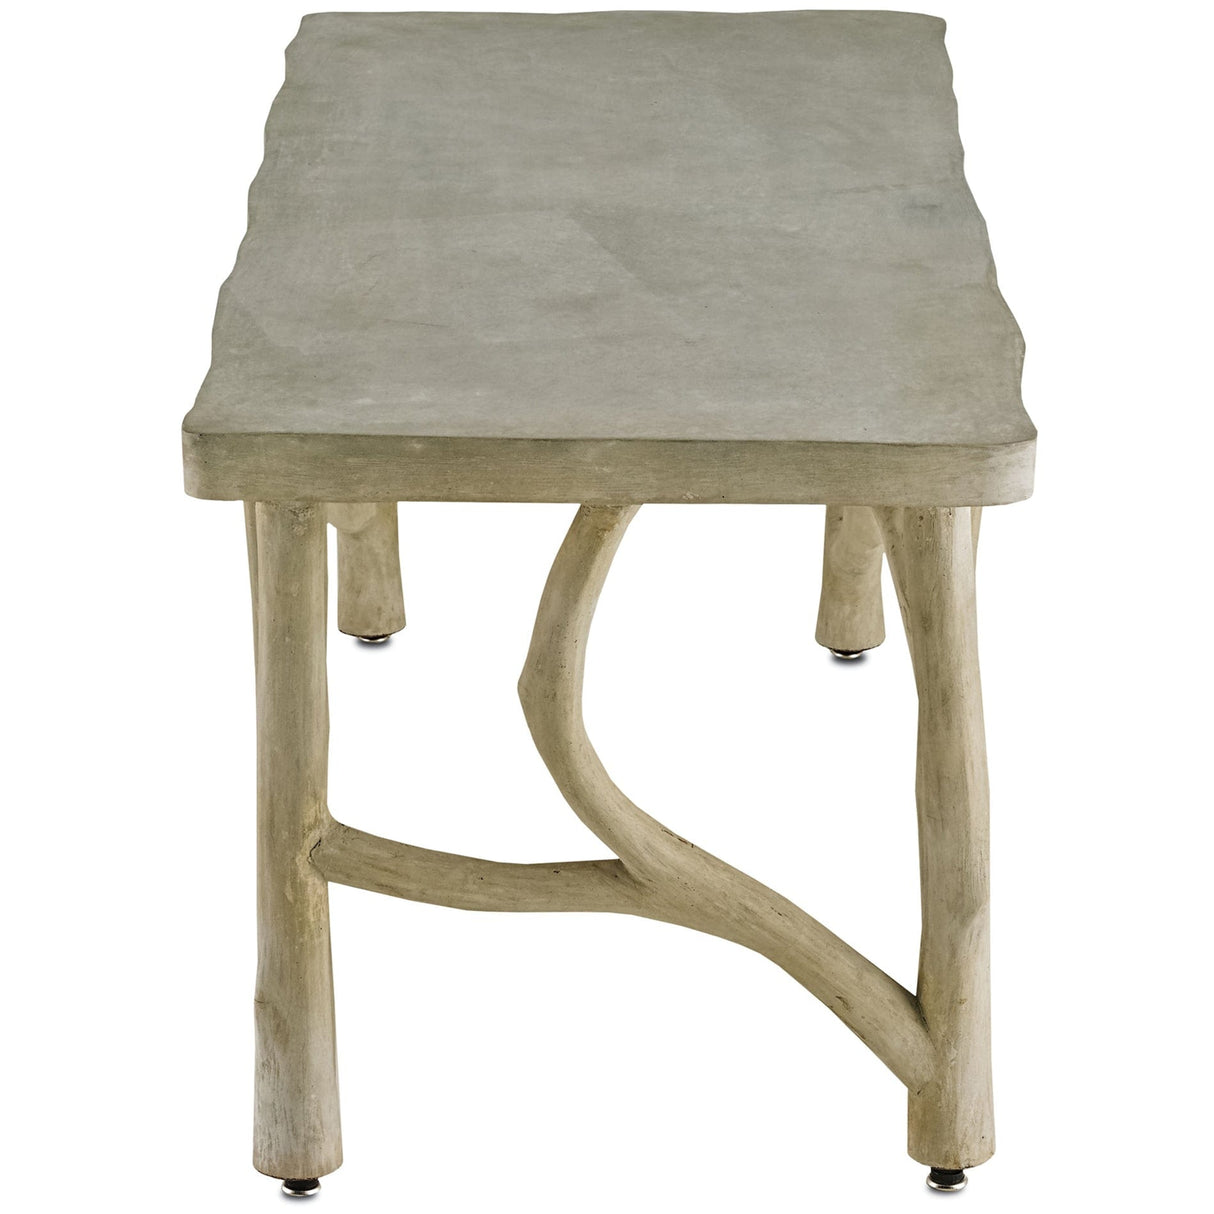 Currey & Company Creekside Table/Bench Furniture currey-co-2038